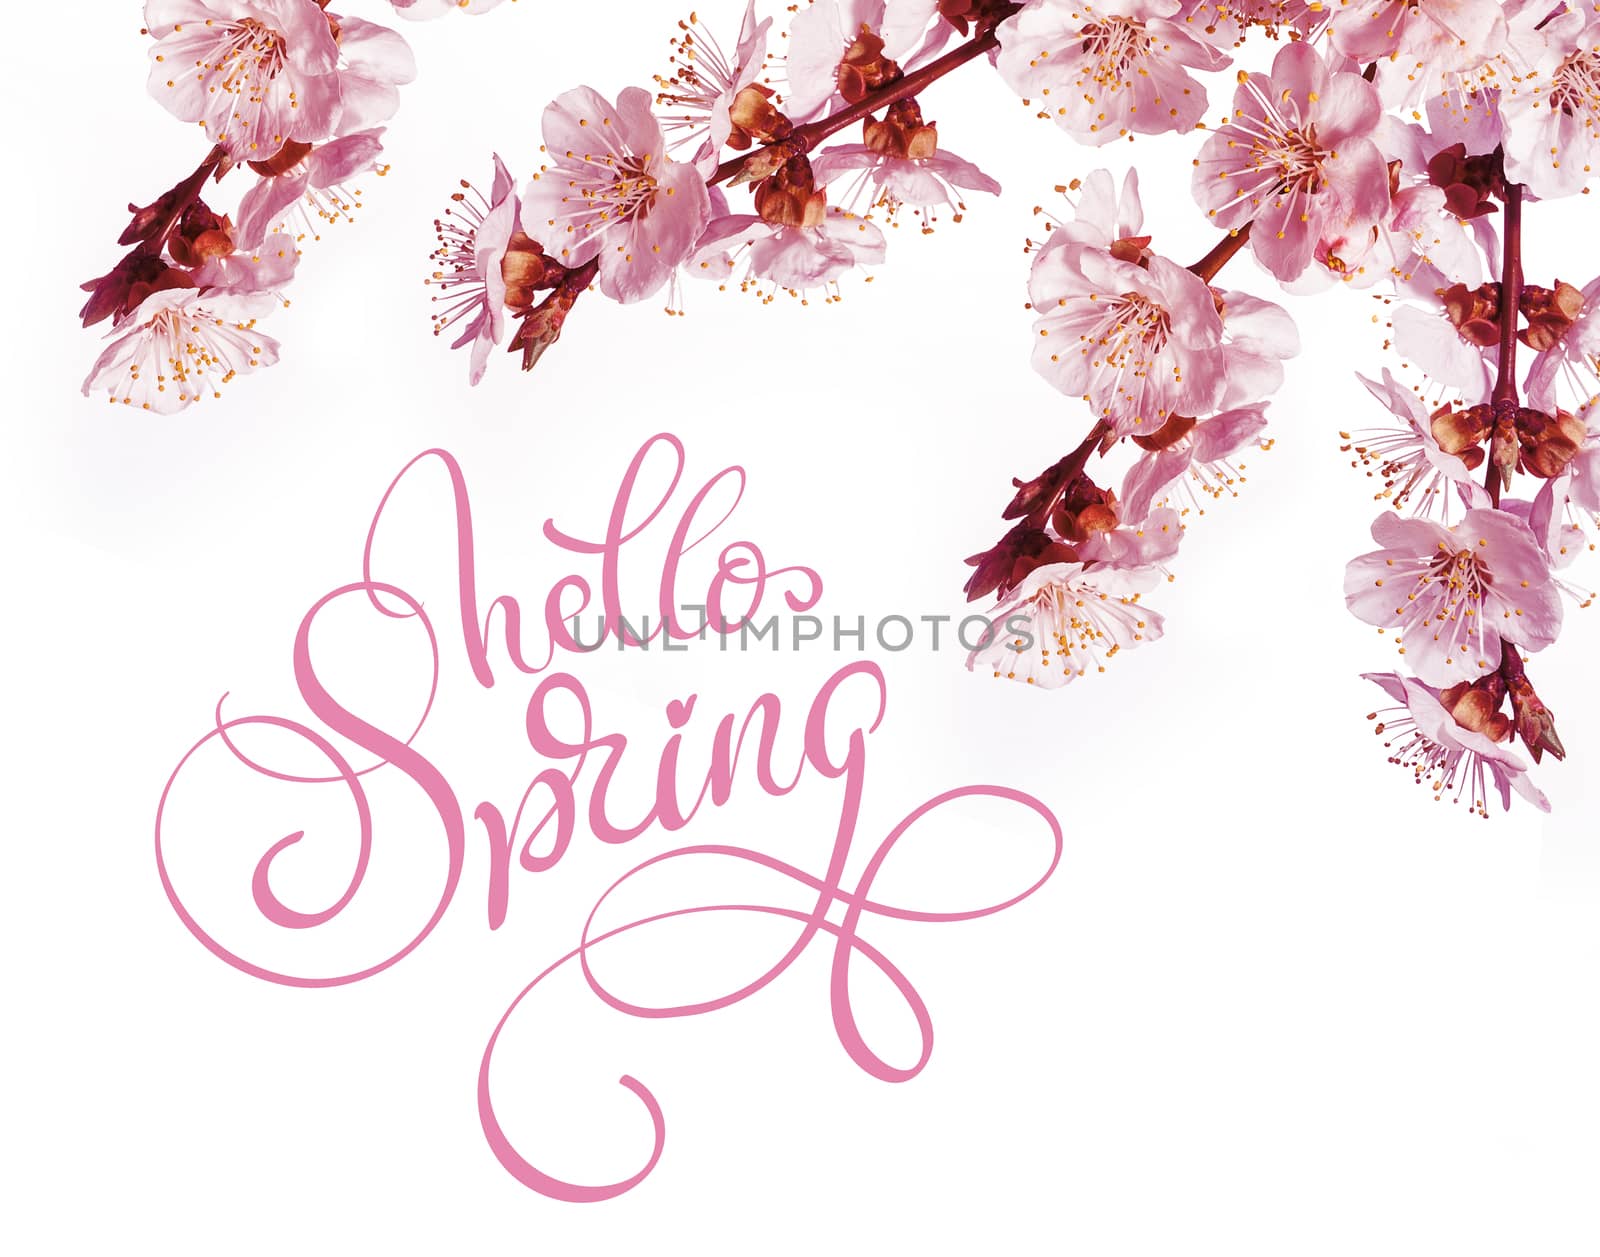 Spring flowers border and text Hello Spring. Calligraphy lettering by timonko